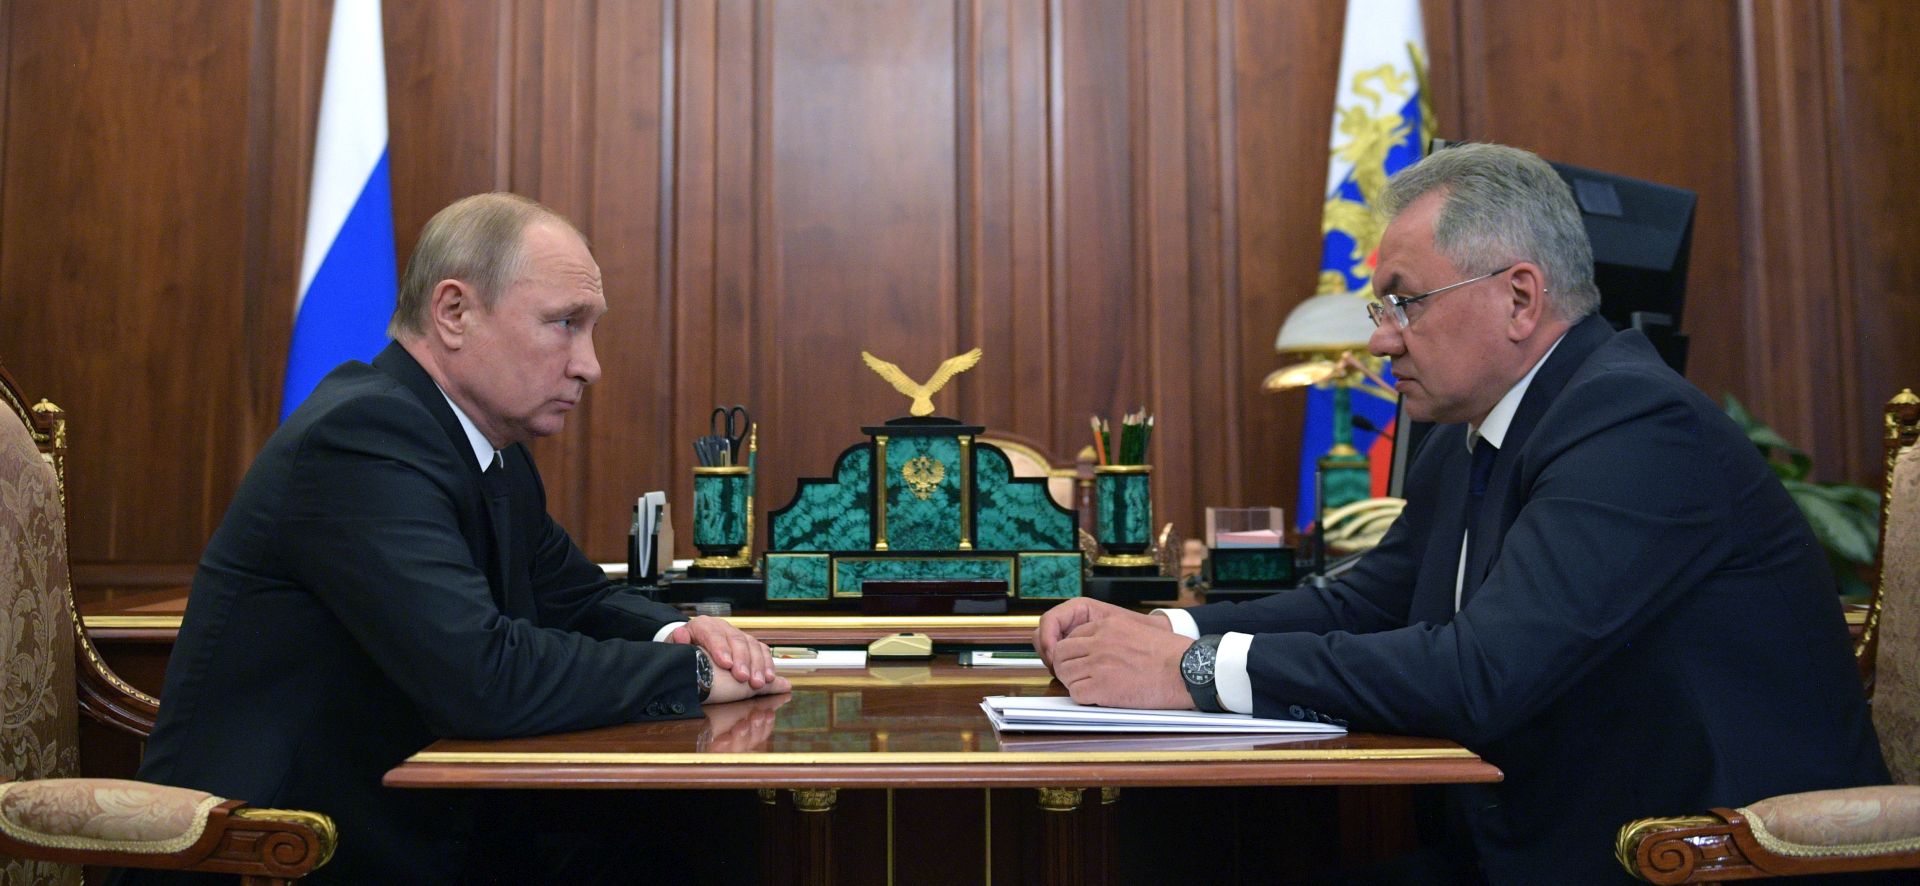 epa07690403 Russian president Vladimir Putin (L) listens to a report of Defence Minister Sergei Shoigu (R) about fire inside deepwater minisubmarine during their meeting at the Kremlin in Moscow, Russia, 02 July 2019. According to media reports citing the Russian Ministry of Defense, a fire incident inside a Russian submarine has left 14 people dead. The vessel is apparently part of the Northern Fleet, which is based in Severomorsk. The accident happened in the evening 01 July while the submarine worked on the bottom of Barents Sea in the Russian waters. There were two heroes of Russia among the crew of the submarine.  EPA/ALEXEI DRUZHININ / SPUTNIK / KREMLIN POOL MANDATORY CREDIT